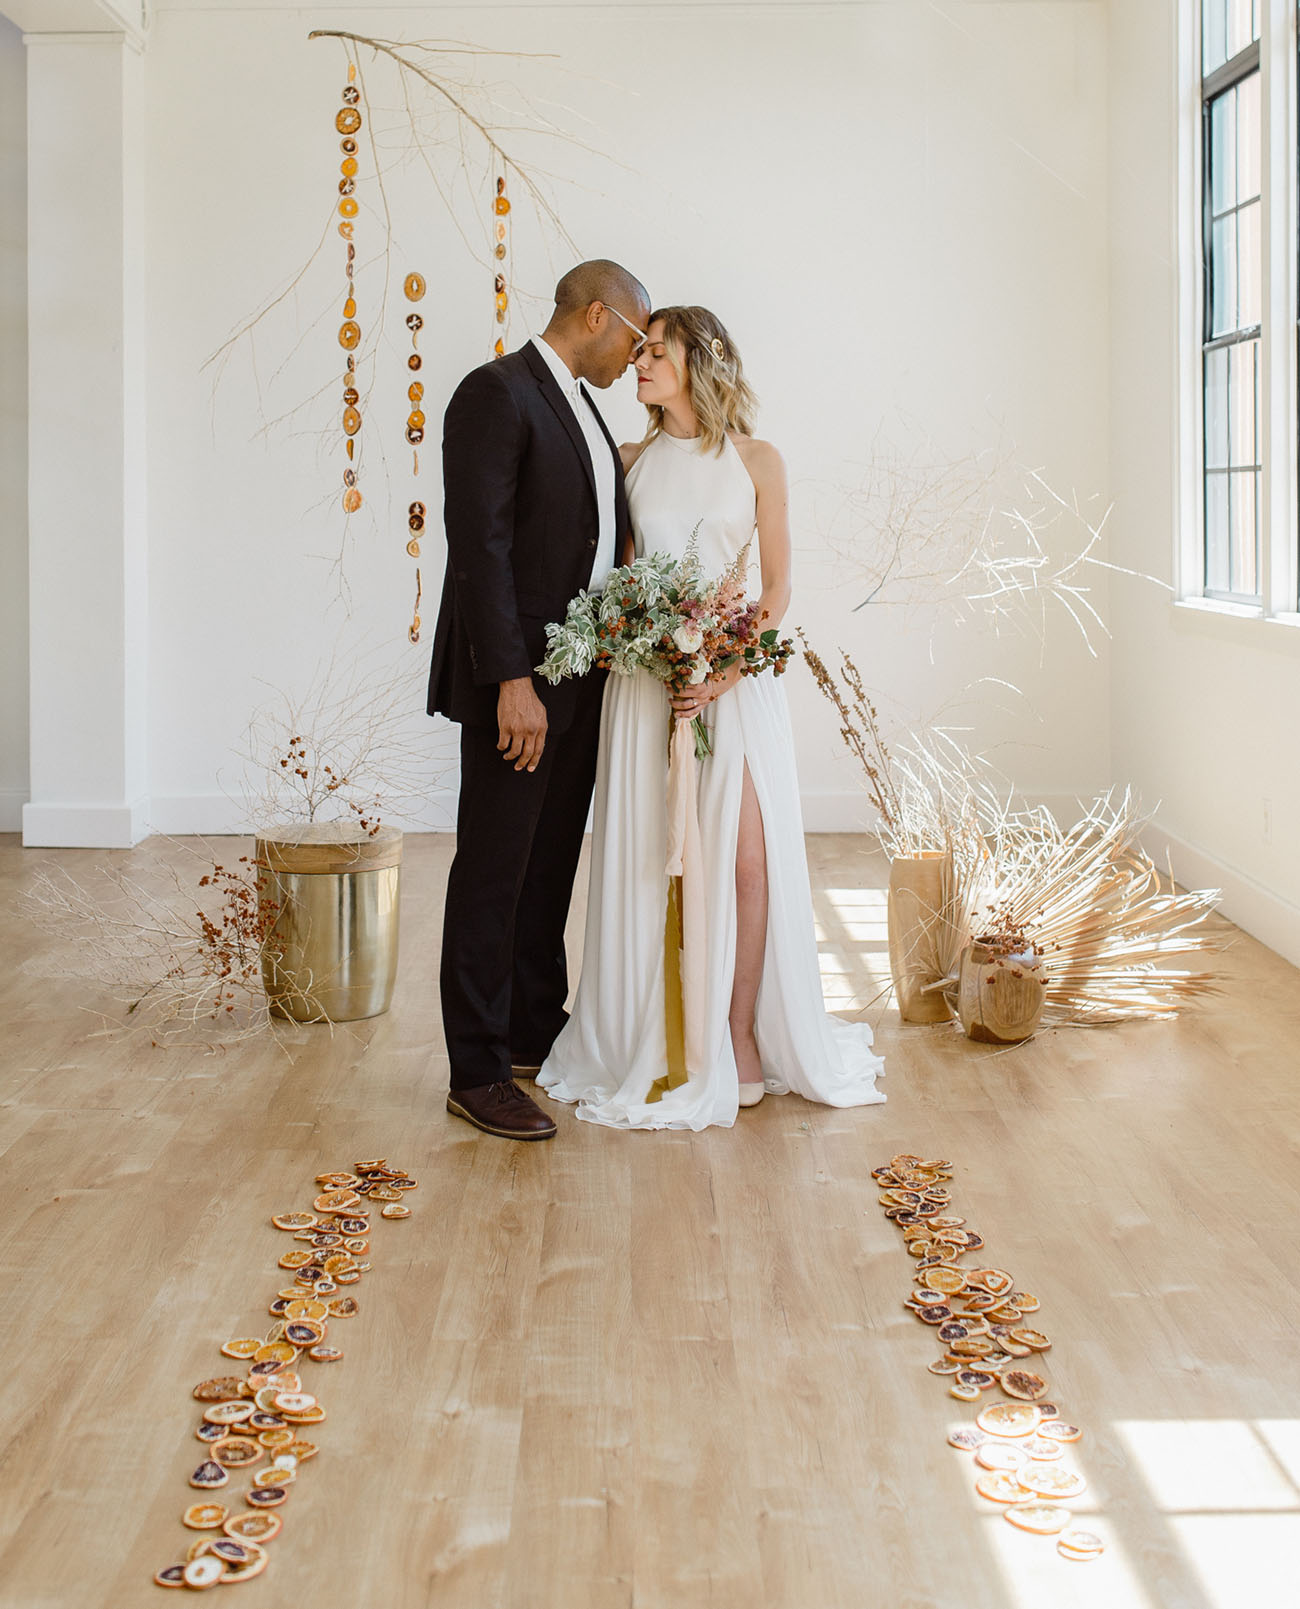 This gorgeous minimalist loft wedding shoot was inspired by California in the fall and touches of citrus